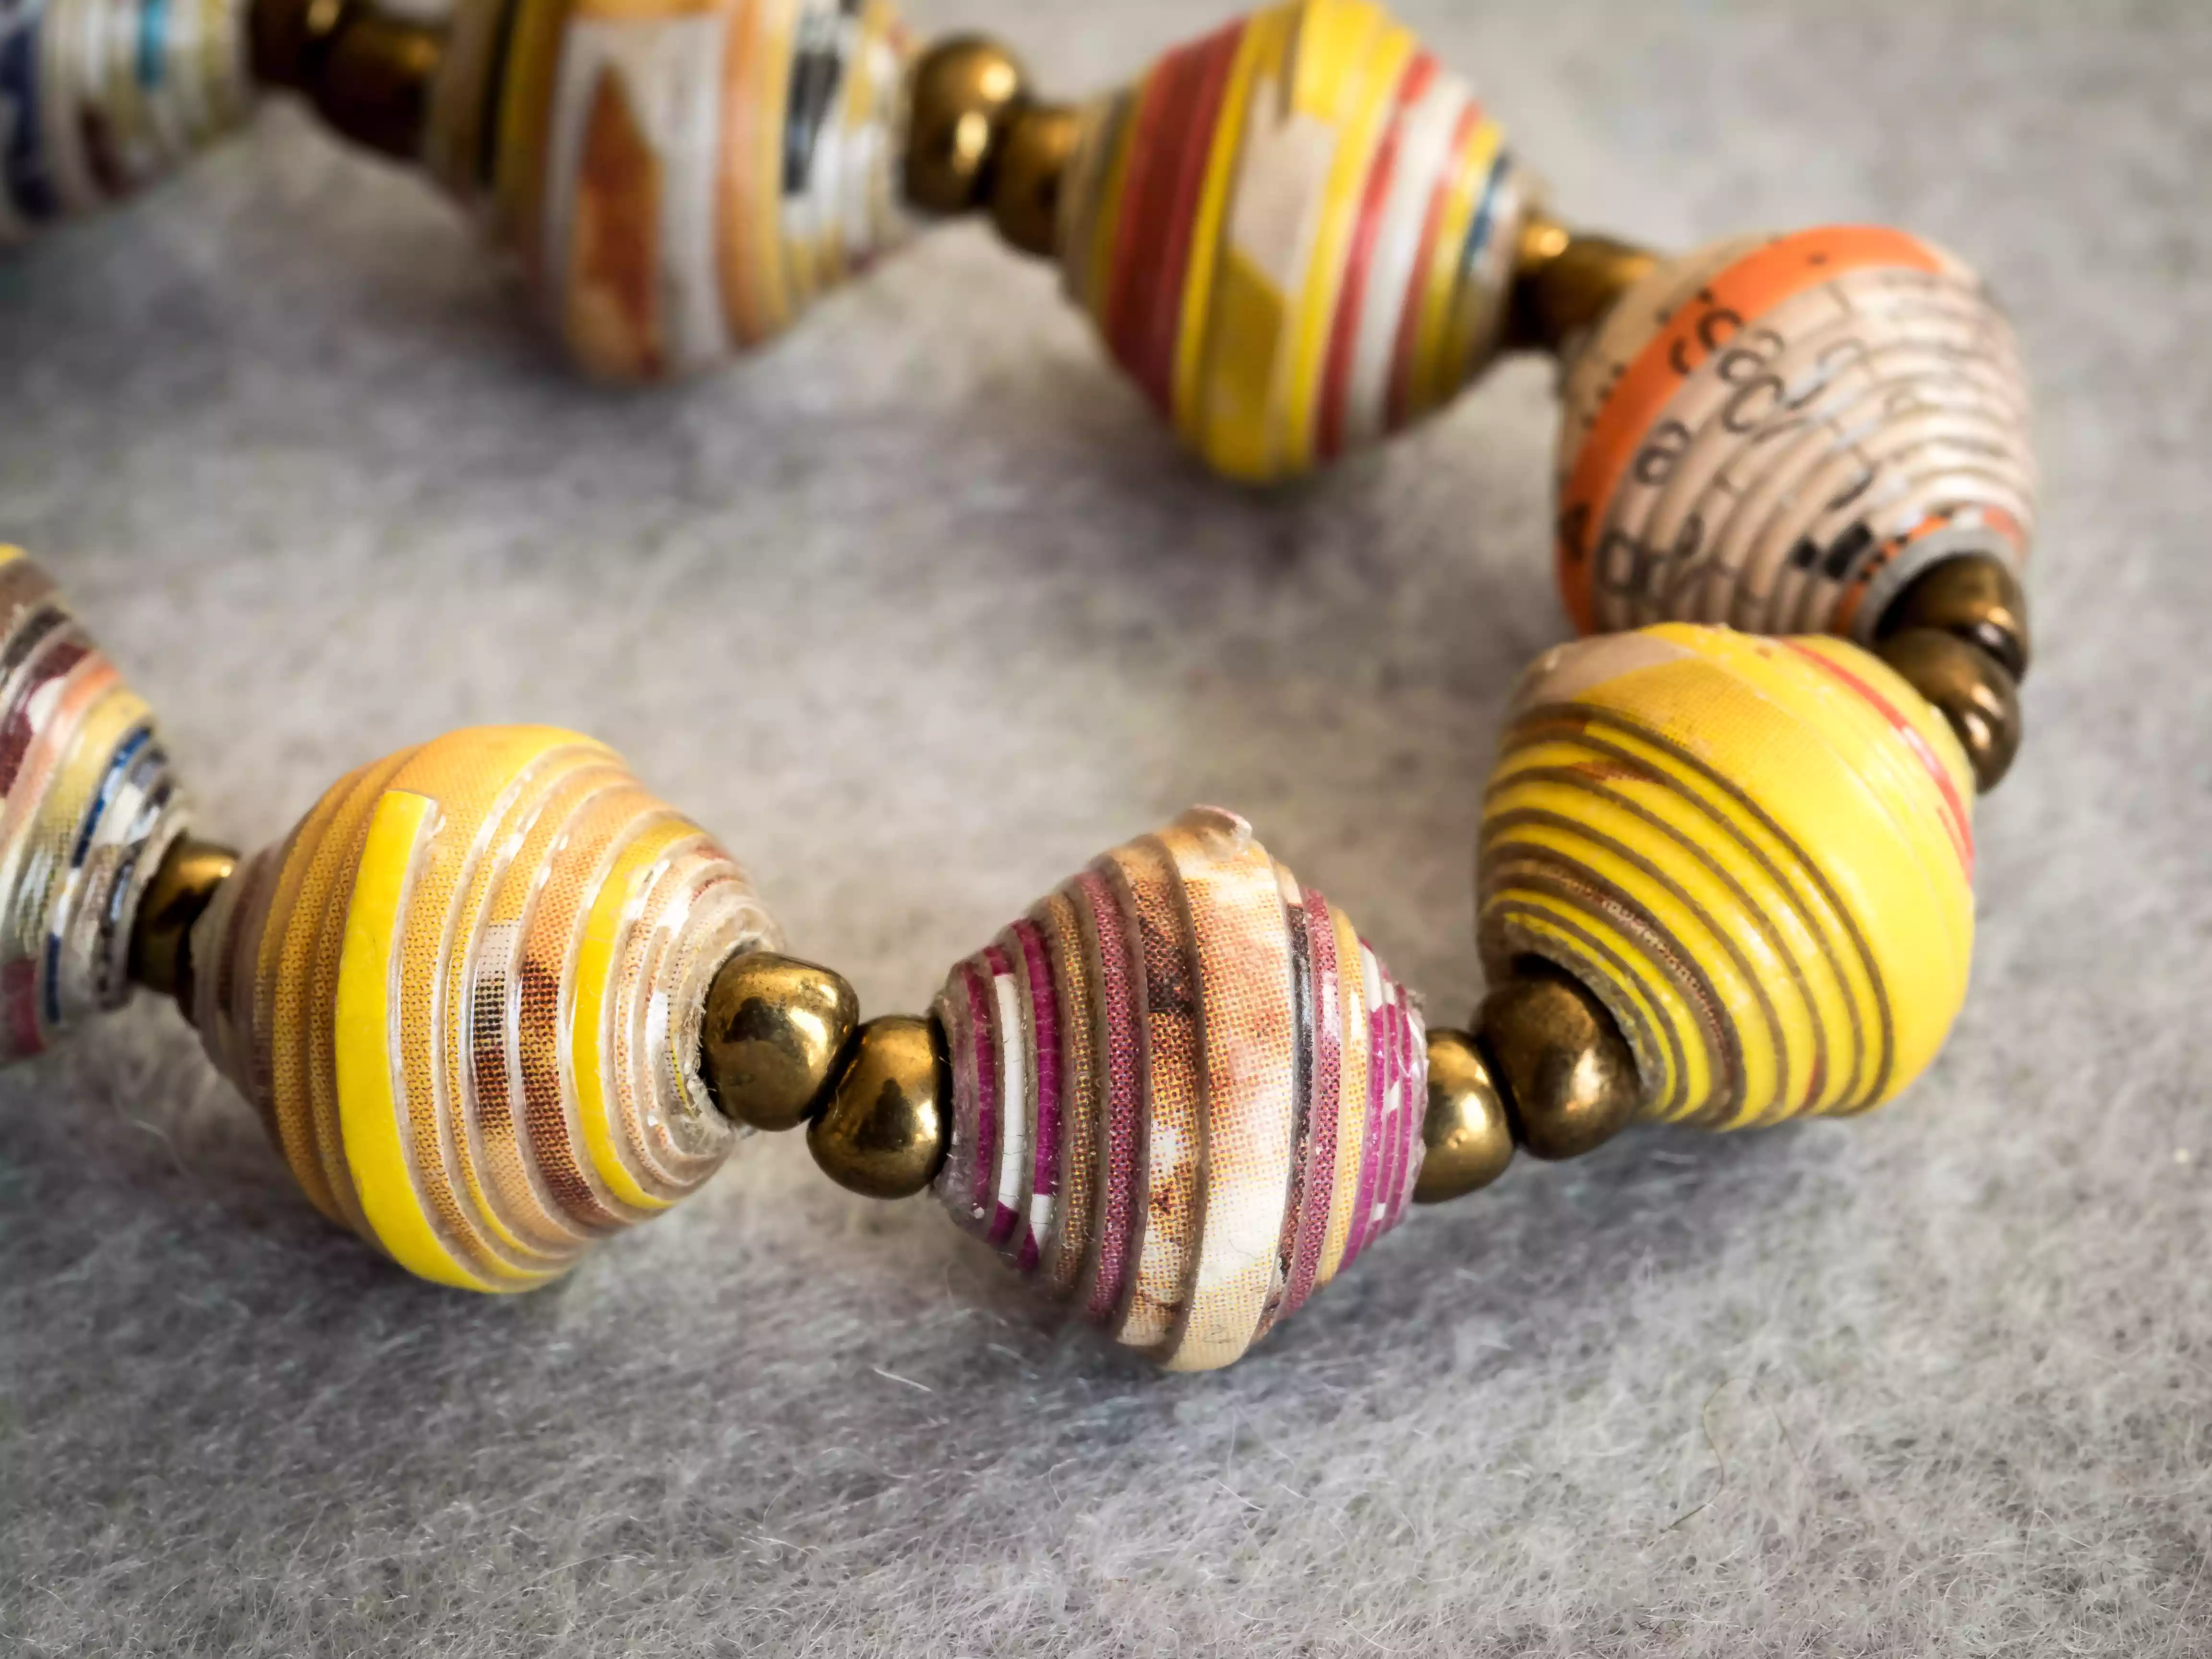 Bracelet of Colorful, Recycled Paper Beads